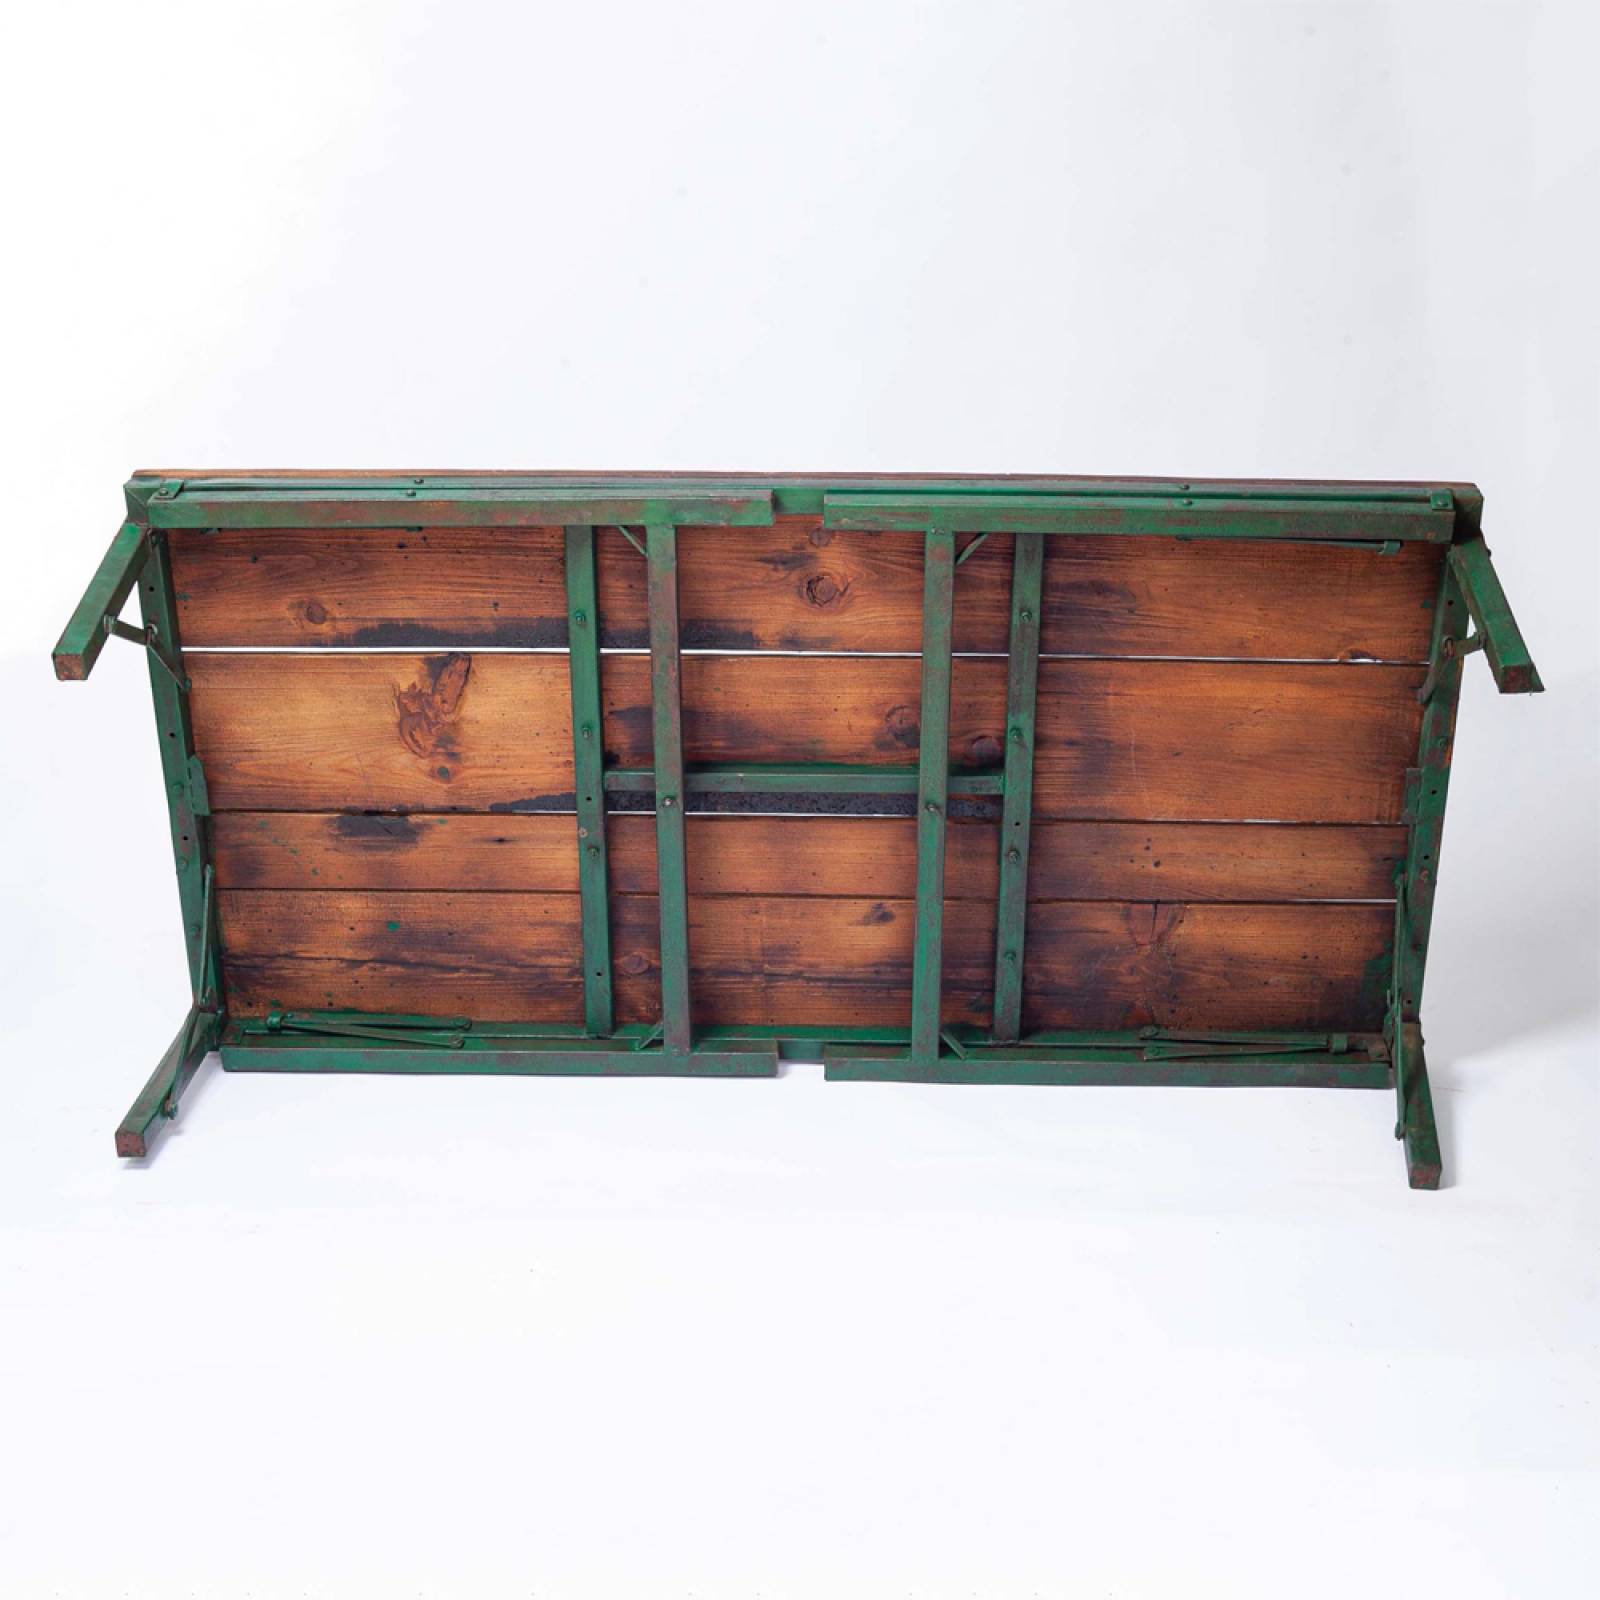 Ishan Reclaimed Folding Dining & Coffee Table thumbnails